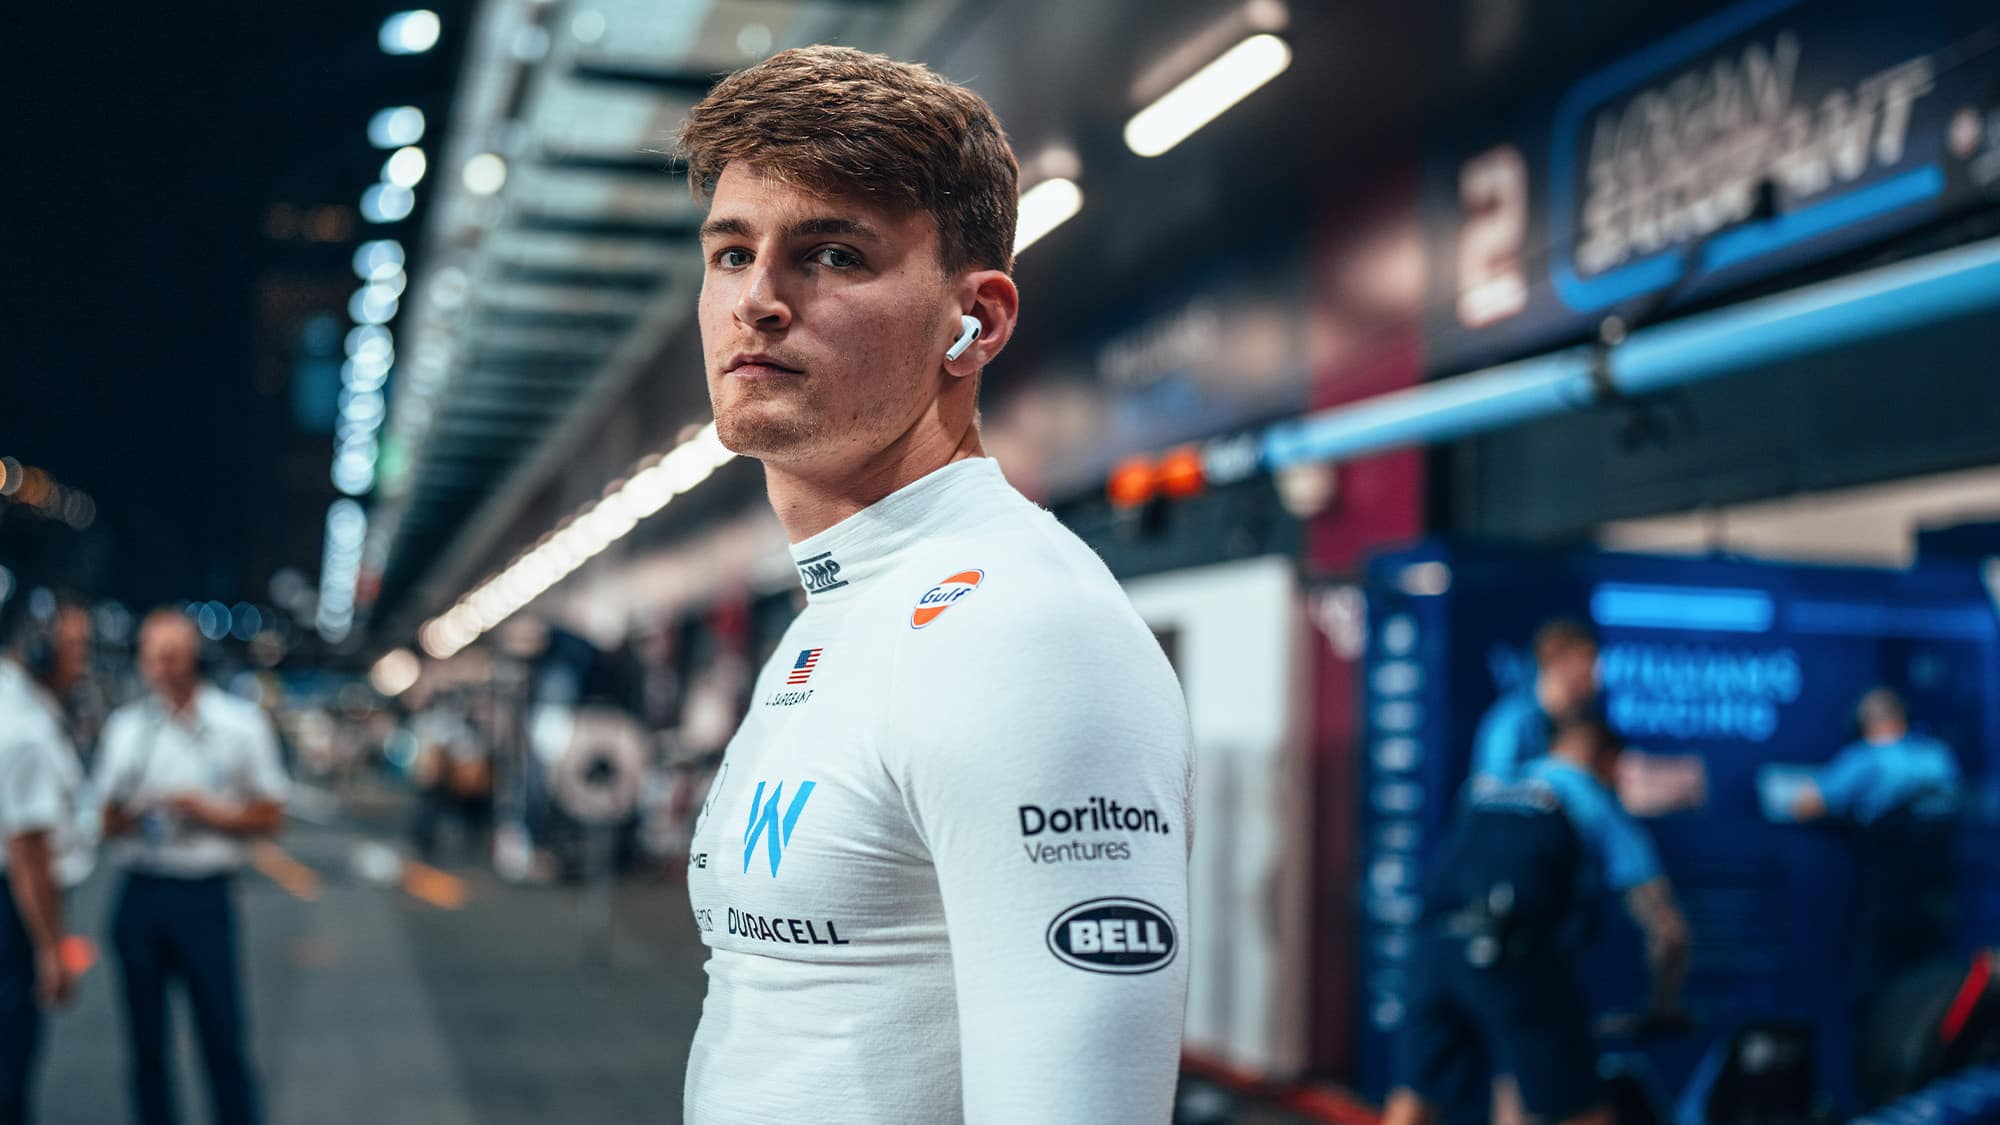 Logan Sargeant aims to shine in F1 Miami GP —his first car race in home